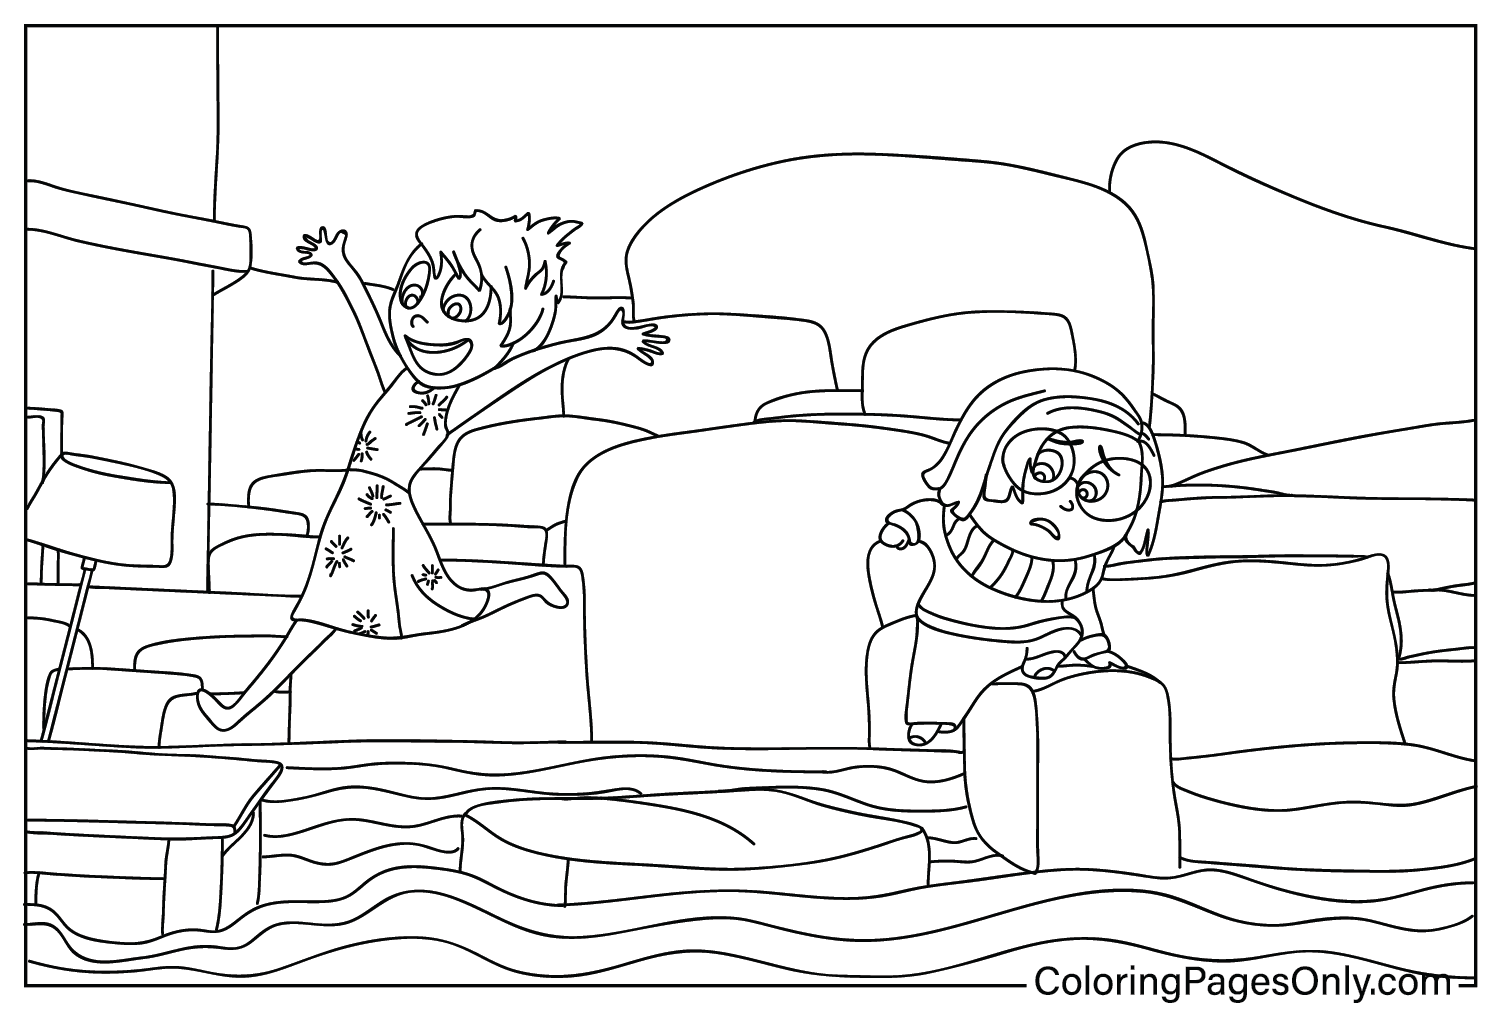 Joy and Sadness Coloring Page - Free Printable Coloring Pages